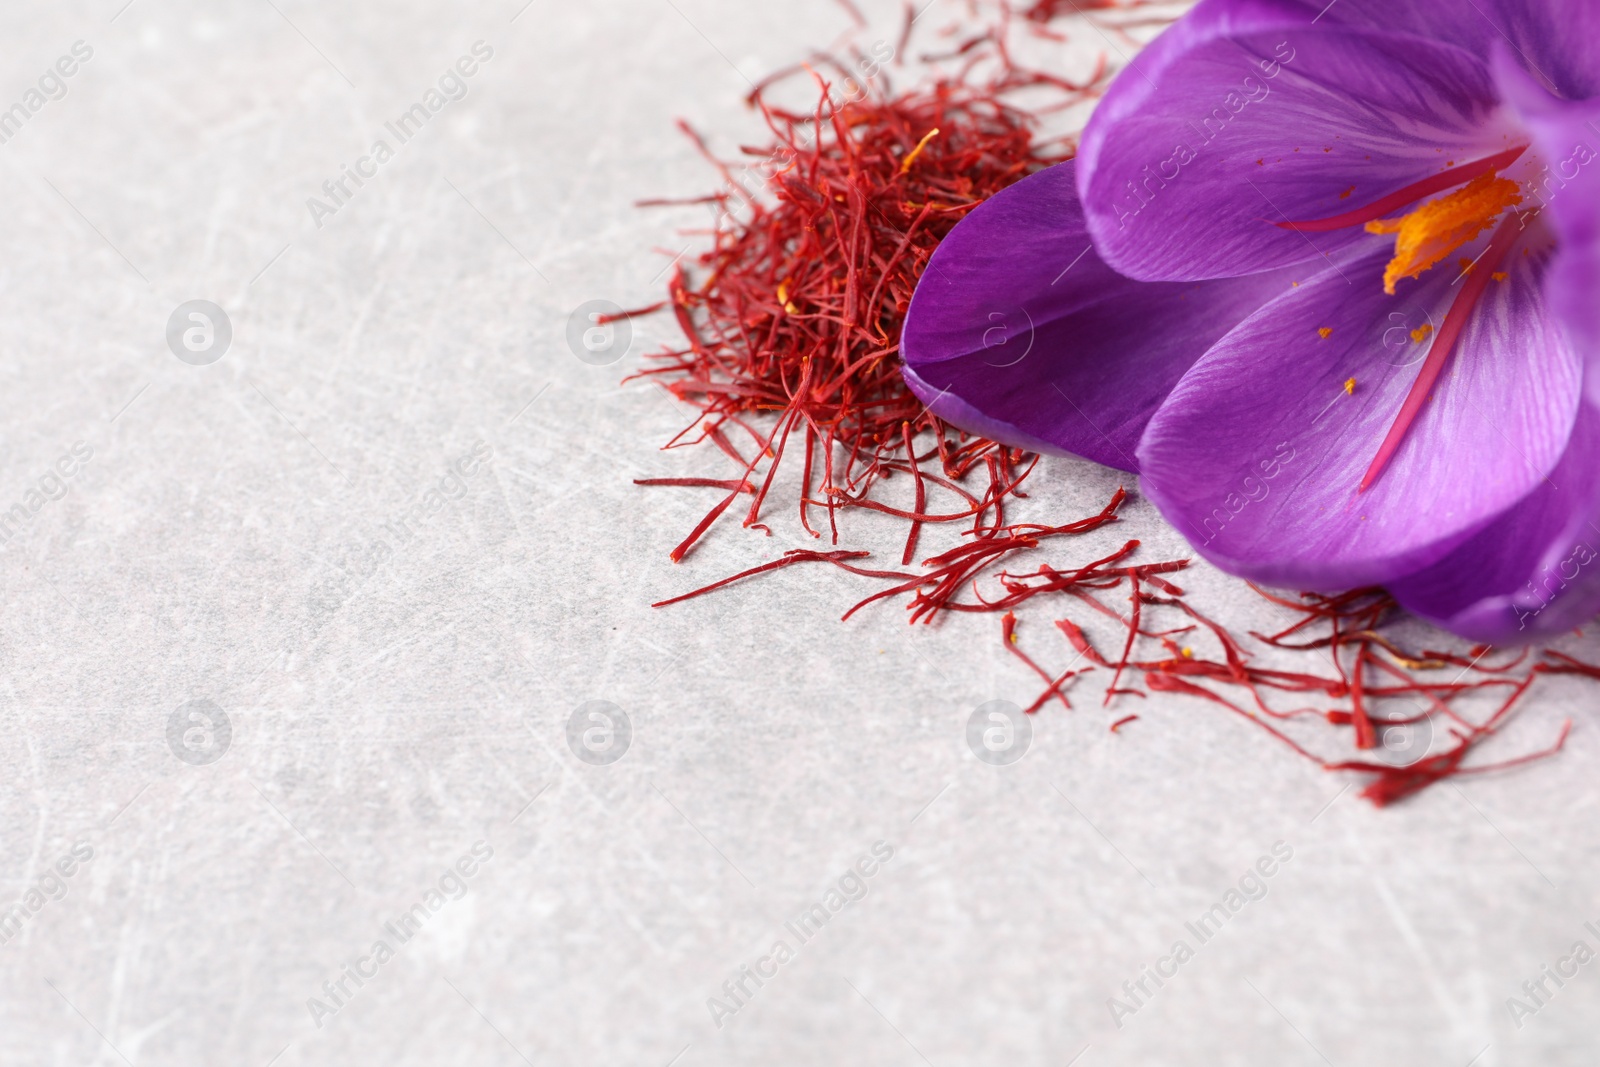 Photo of Dried saffron and crocus flower on light table, closeup. Space for text